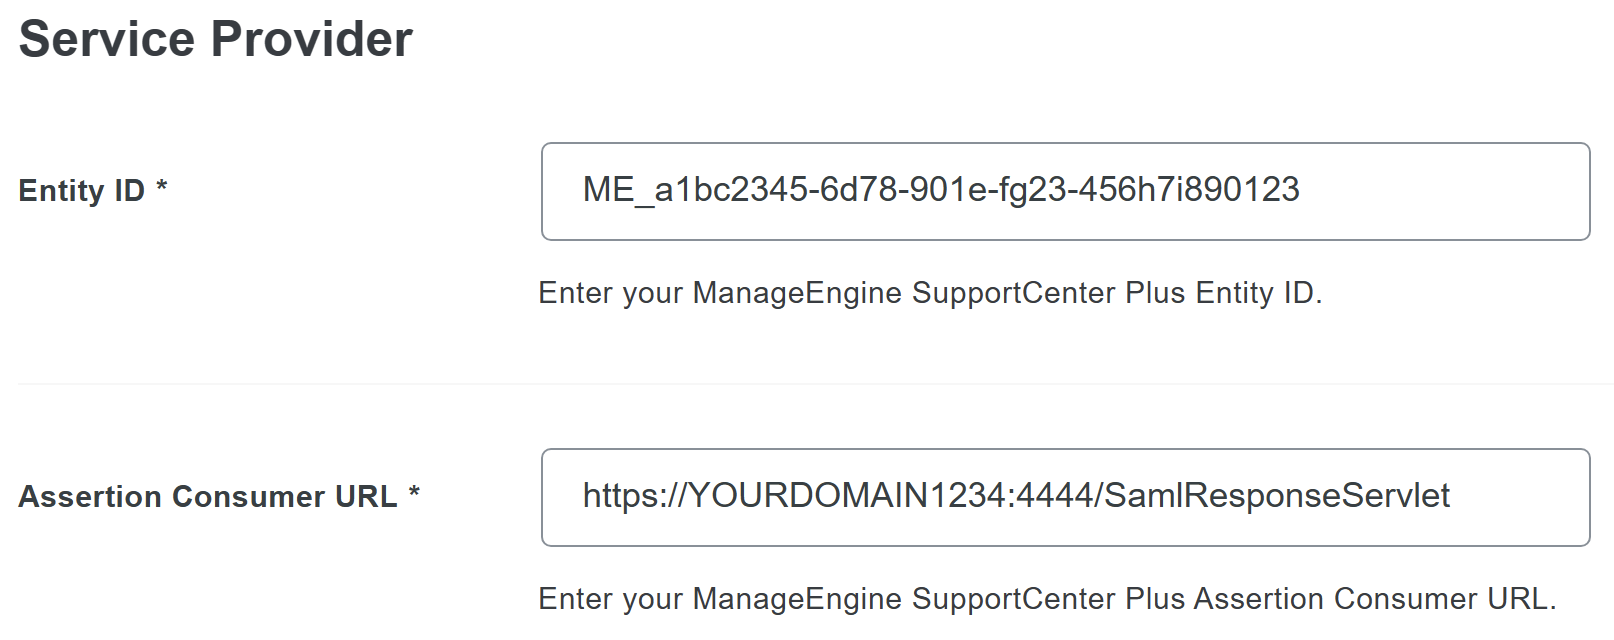 Duo ManageEngine SupportCenter Plus Service Provider Fields